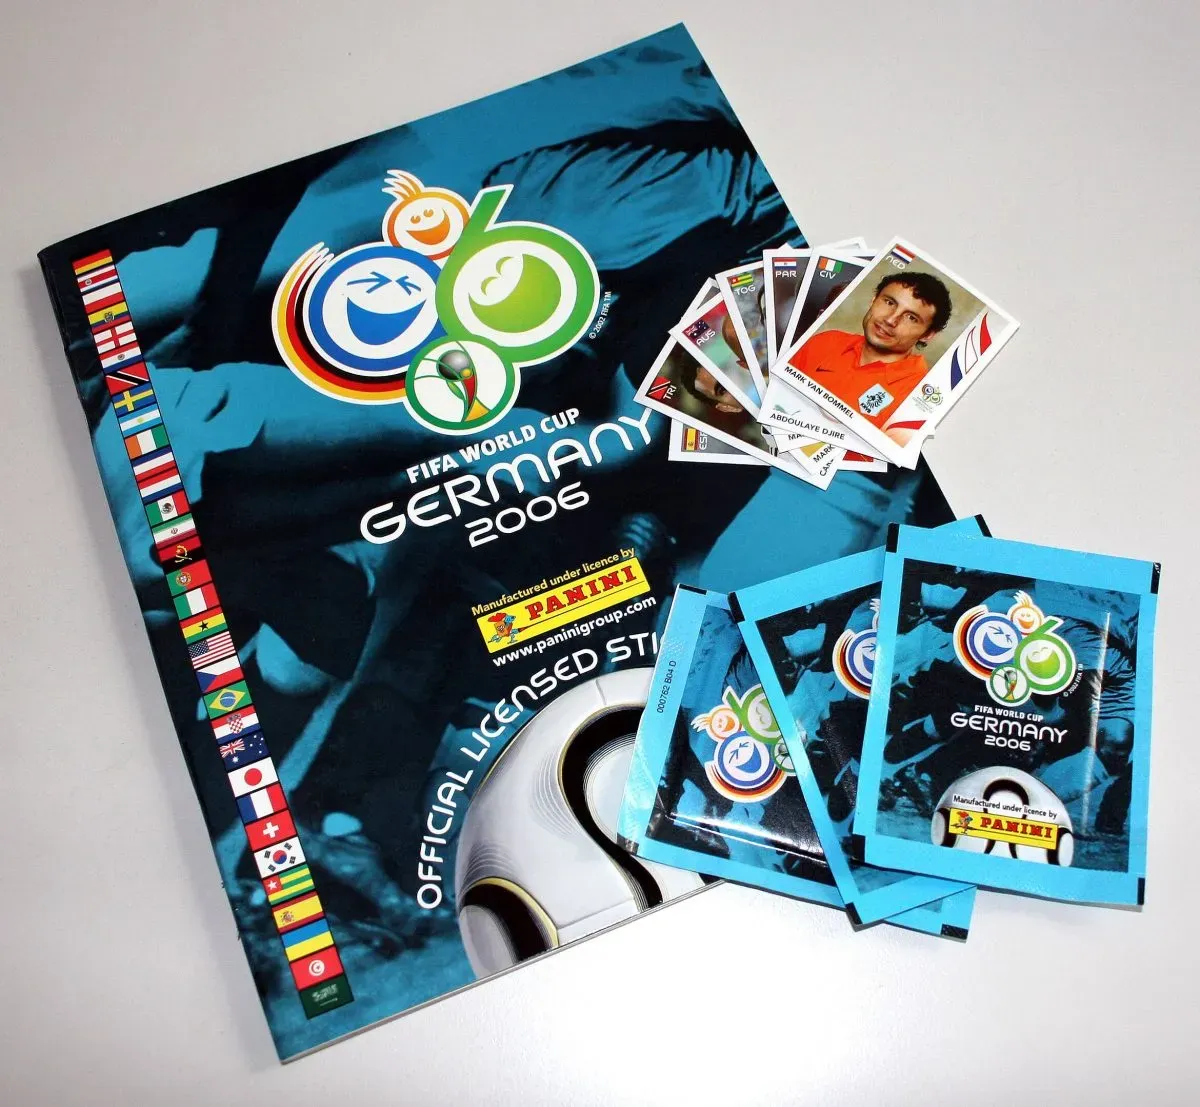 Panini’s sticker albums have been a tradition for football tournaments for many years